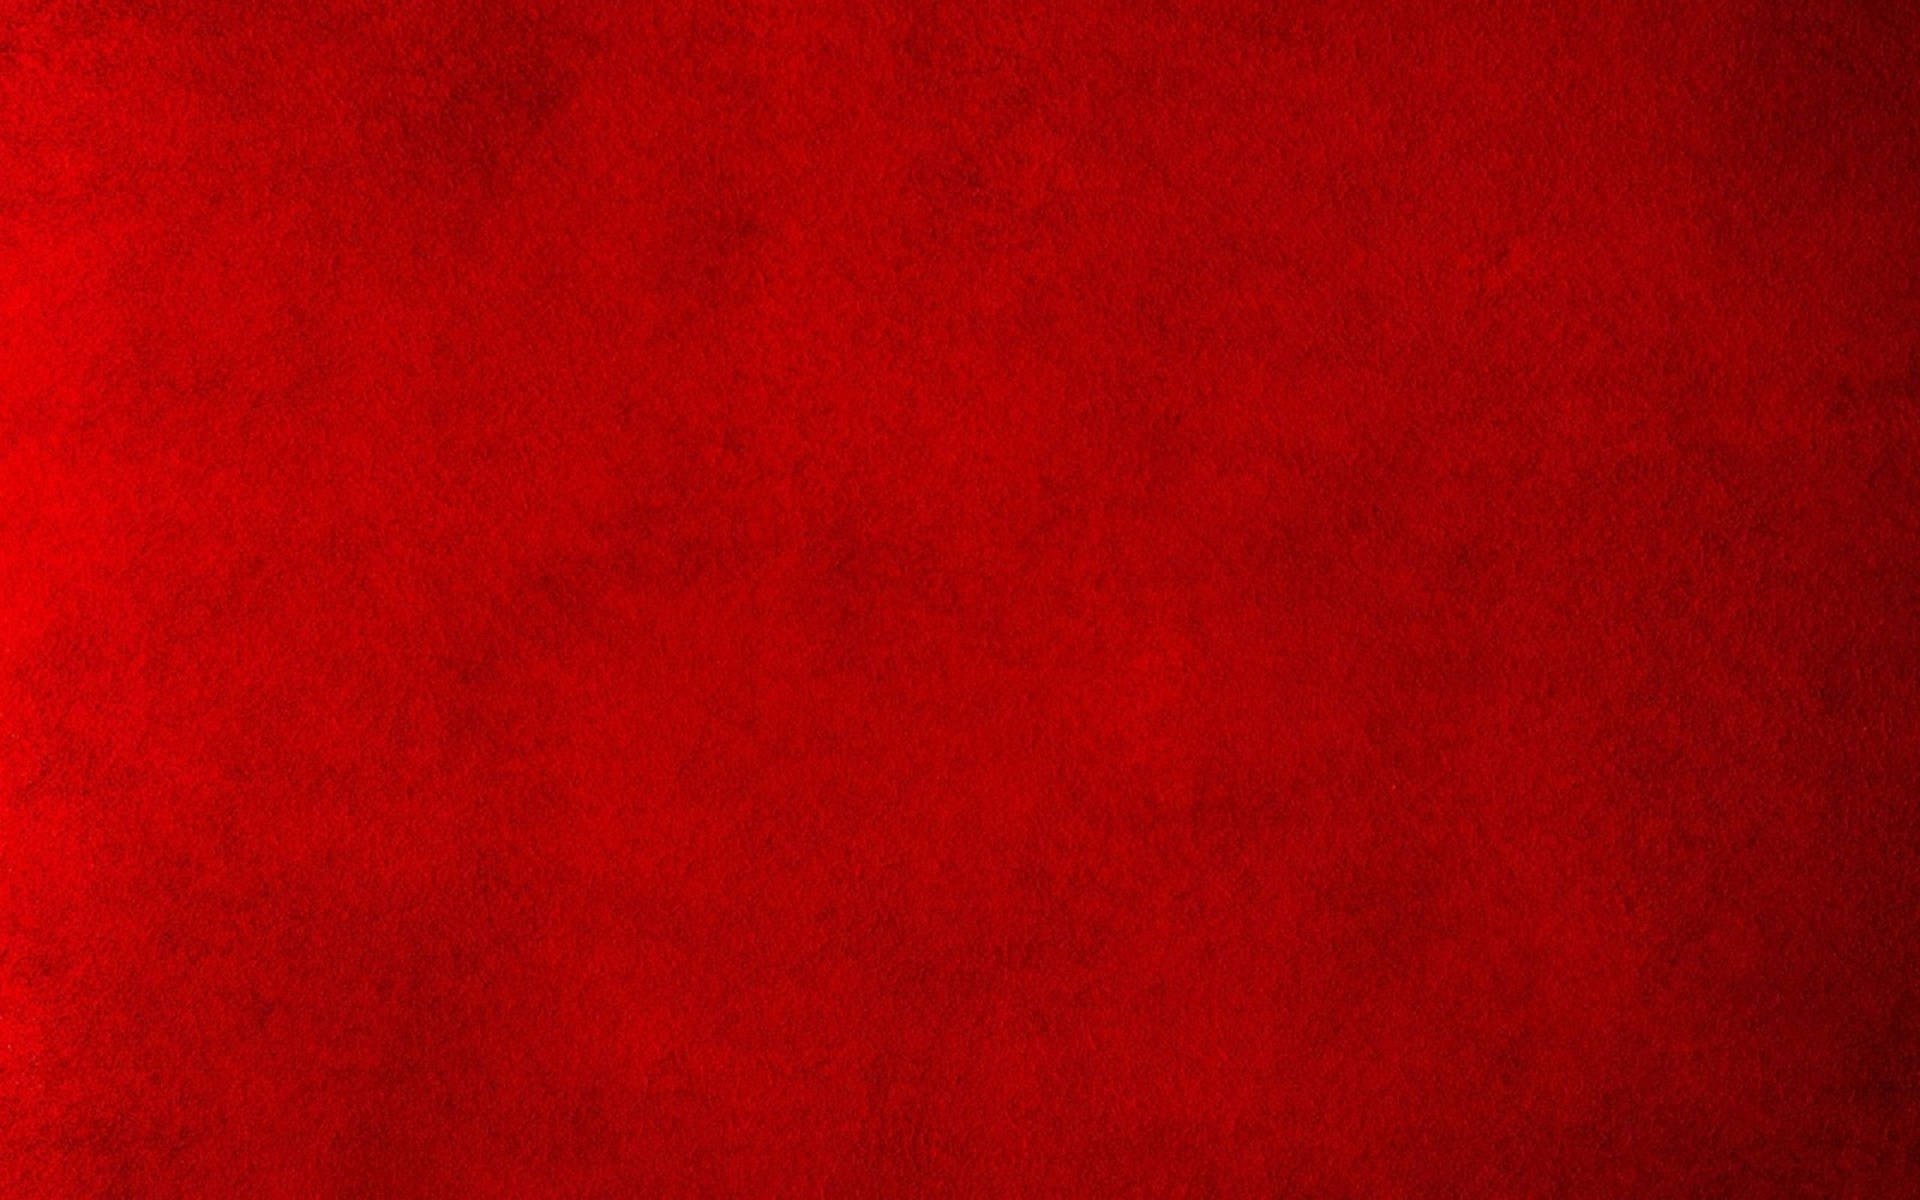 A Vibrant Red Background Background